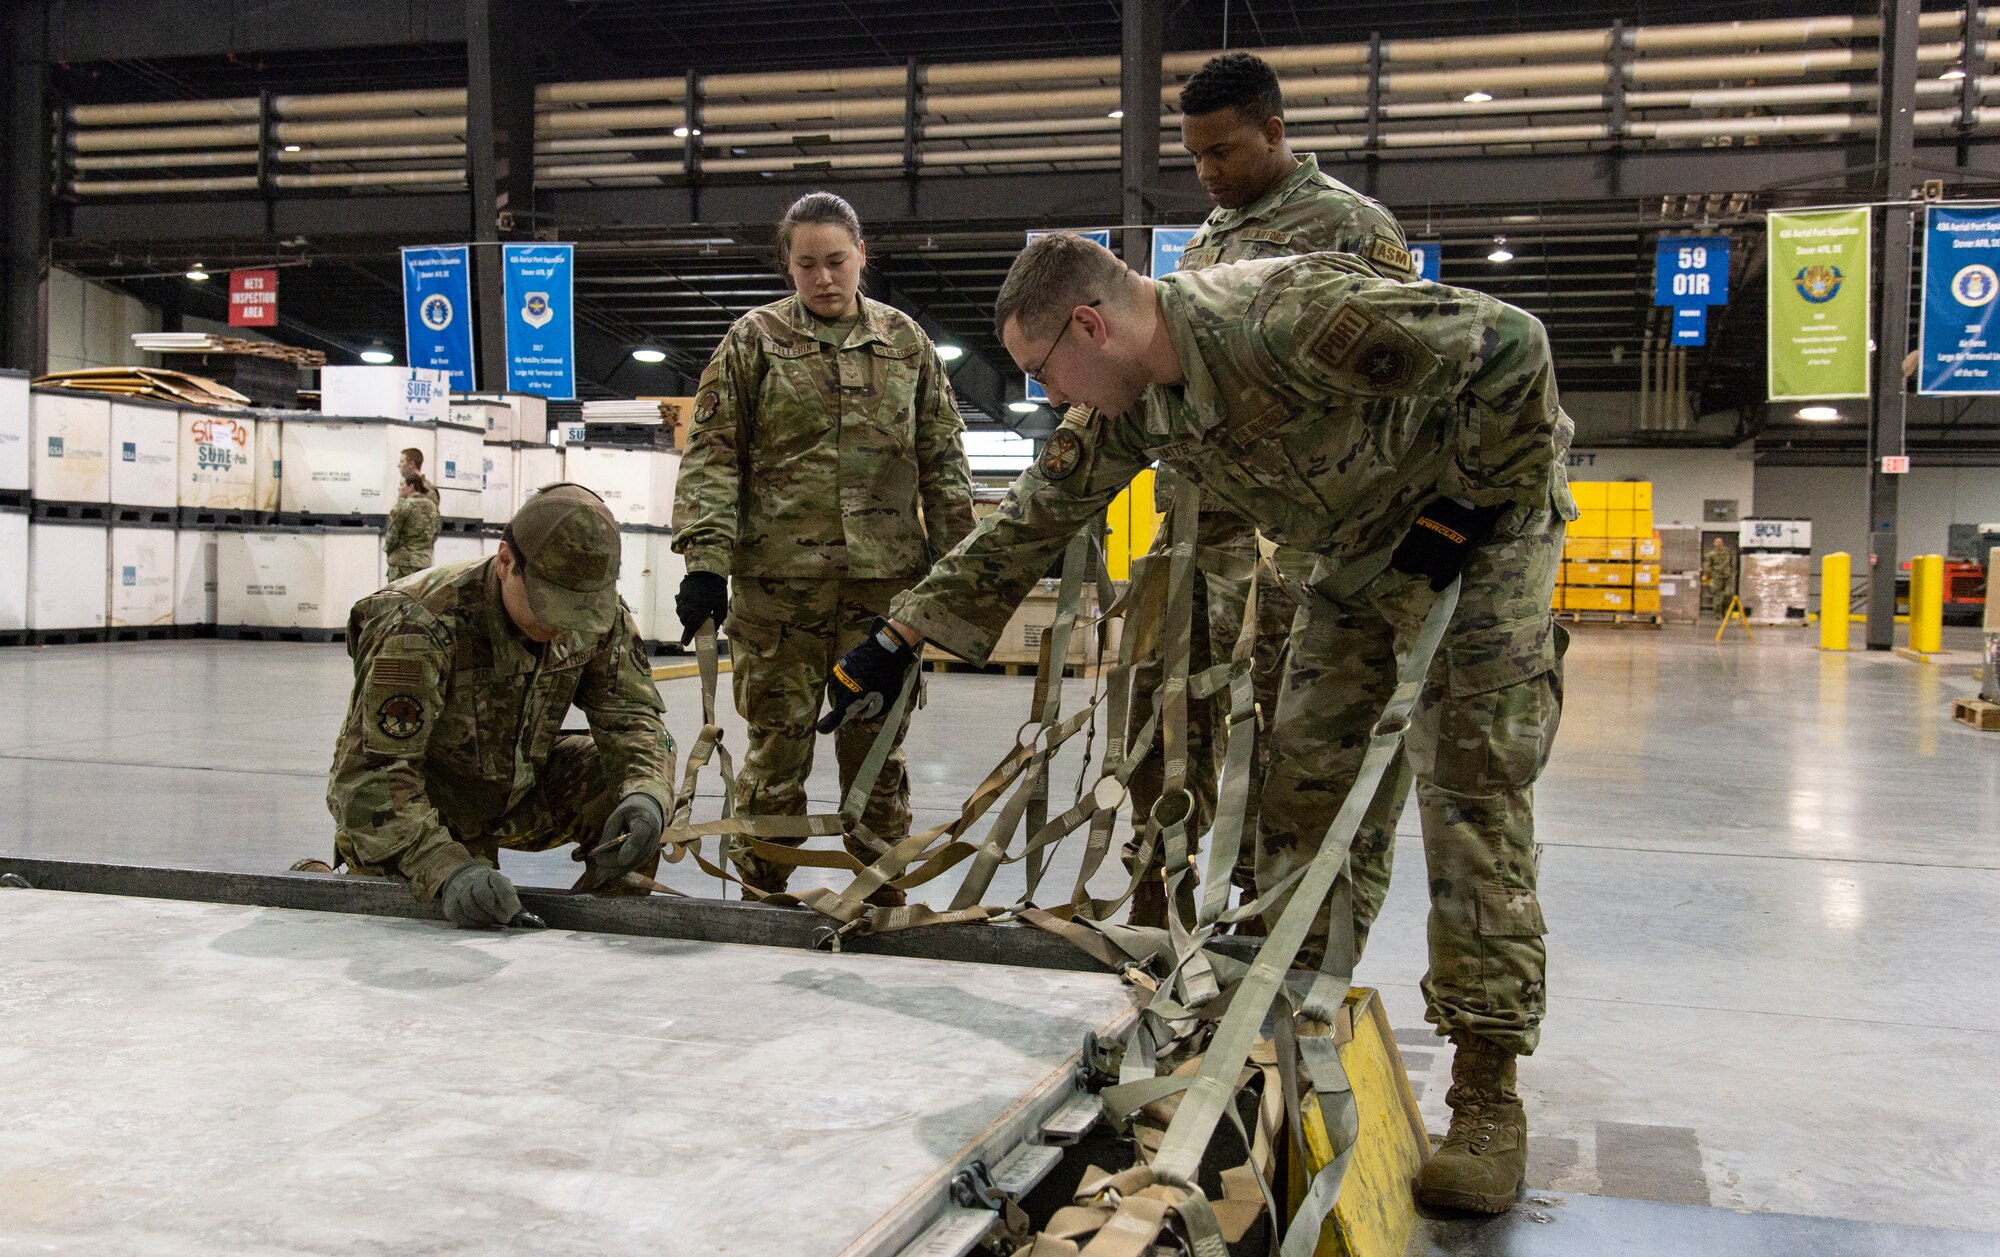 Students participating in a multi-capable Airman training class place cargo netting on a pallet at Dover Air Force Base, Delaware, March 31, 2022. Students received basic pallet building instructions and were assisted by 436th Aerial Port Squadron personnel. (U.S. Air Force photo by Roland Balik)